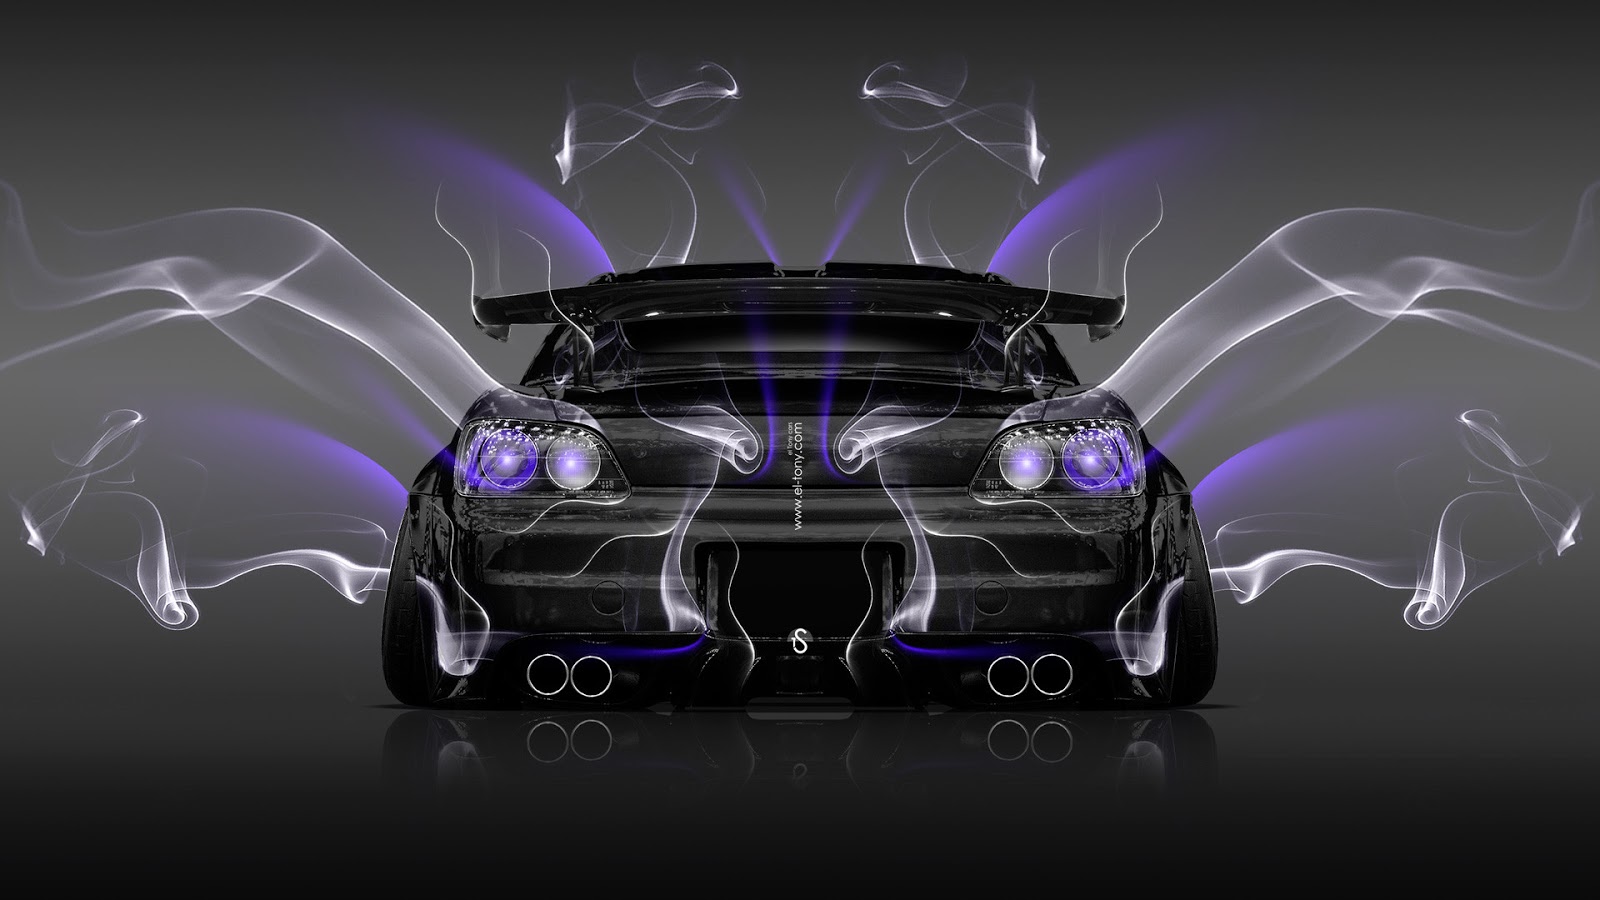 65 Jdm Iphone Wallpaper Are Available For Download - Toyota Cresta Обои , HD Wallpaper & Backgrounds